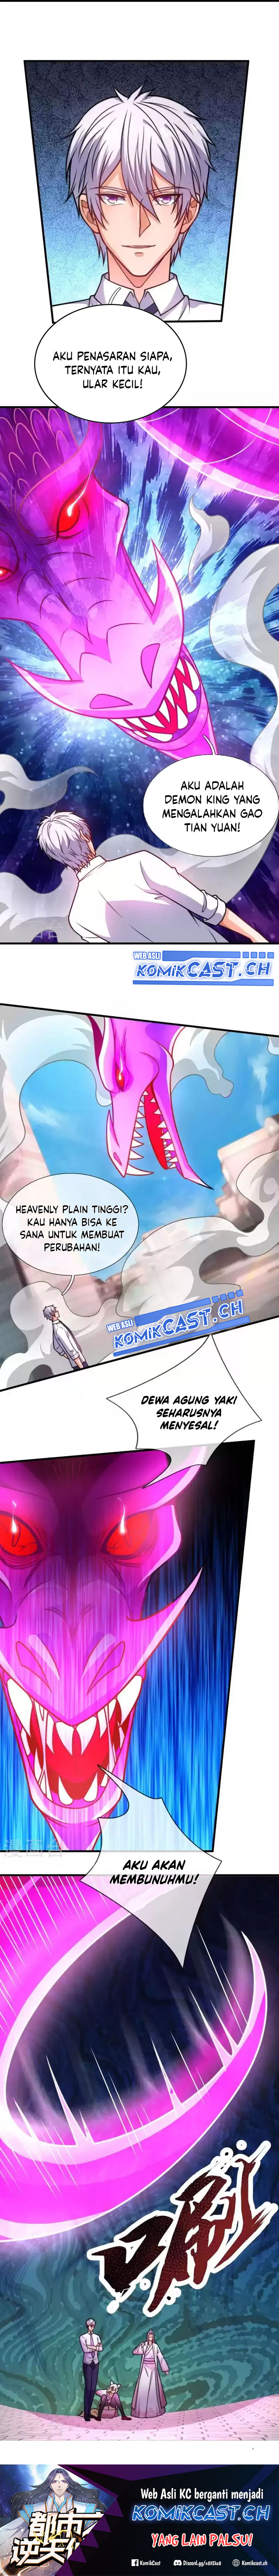 City Of Heaven Timestamp Chapter 342